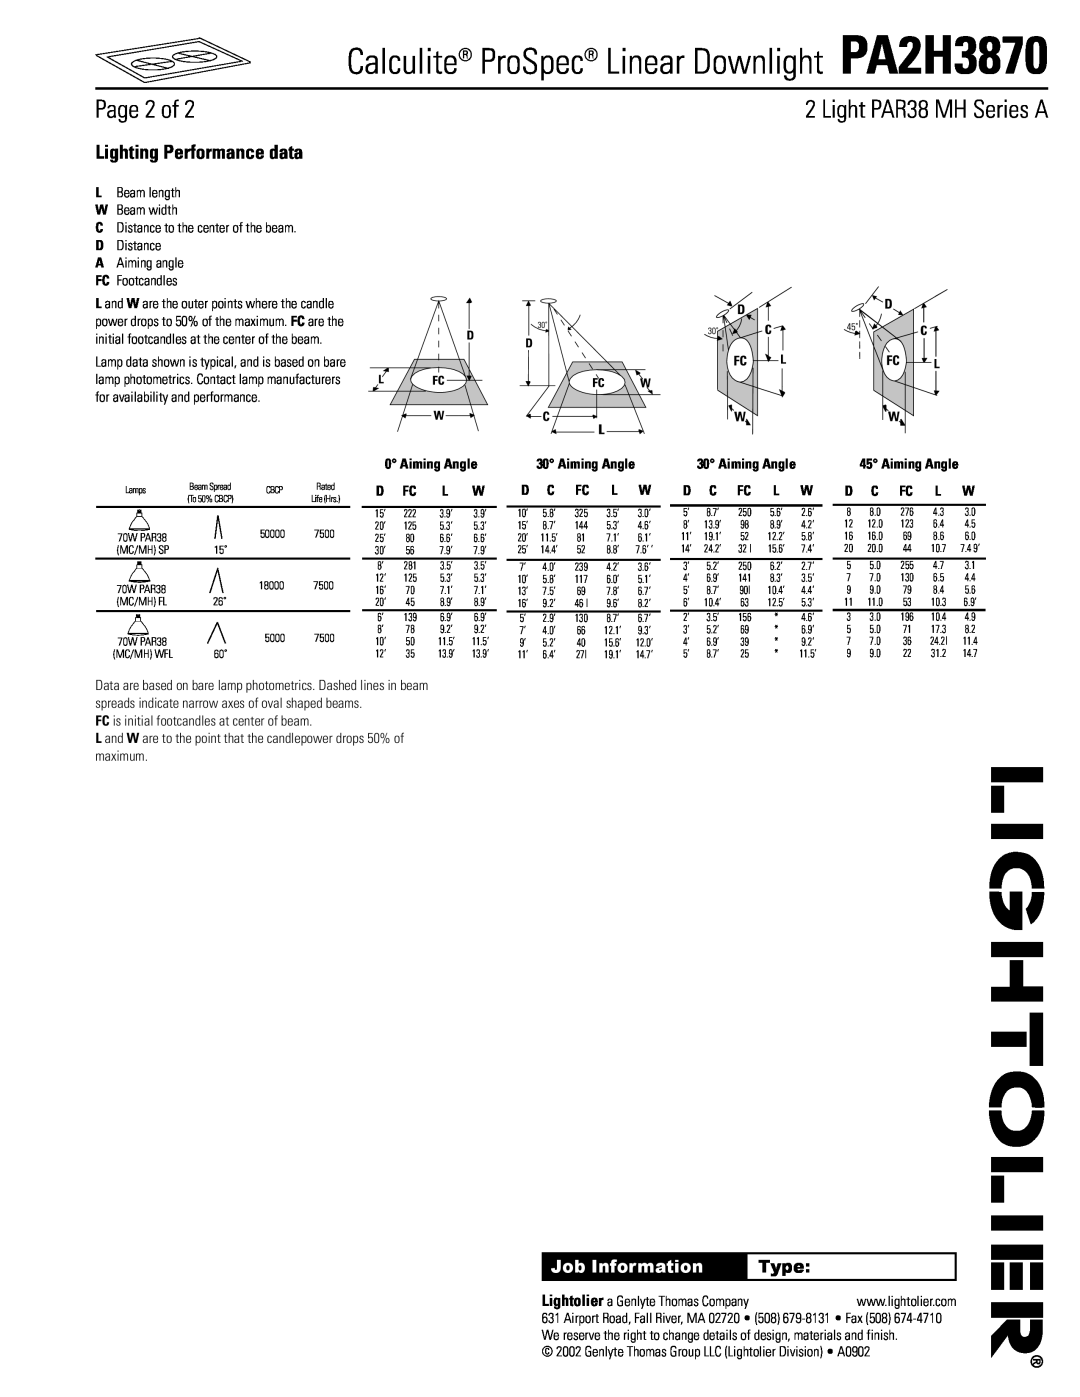 Lightolier PA2H3870 Page 2 of, Light PAR38 MH Series A, Lighting Performance data, Job Information, Type, Aiming Angle 